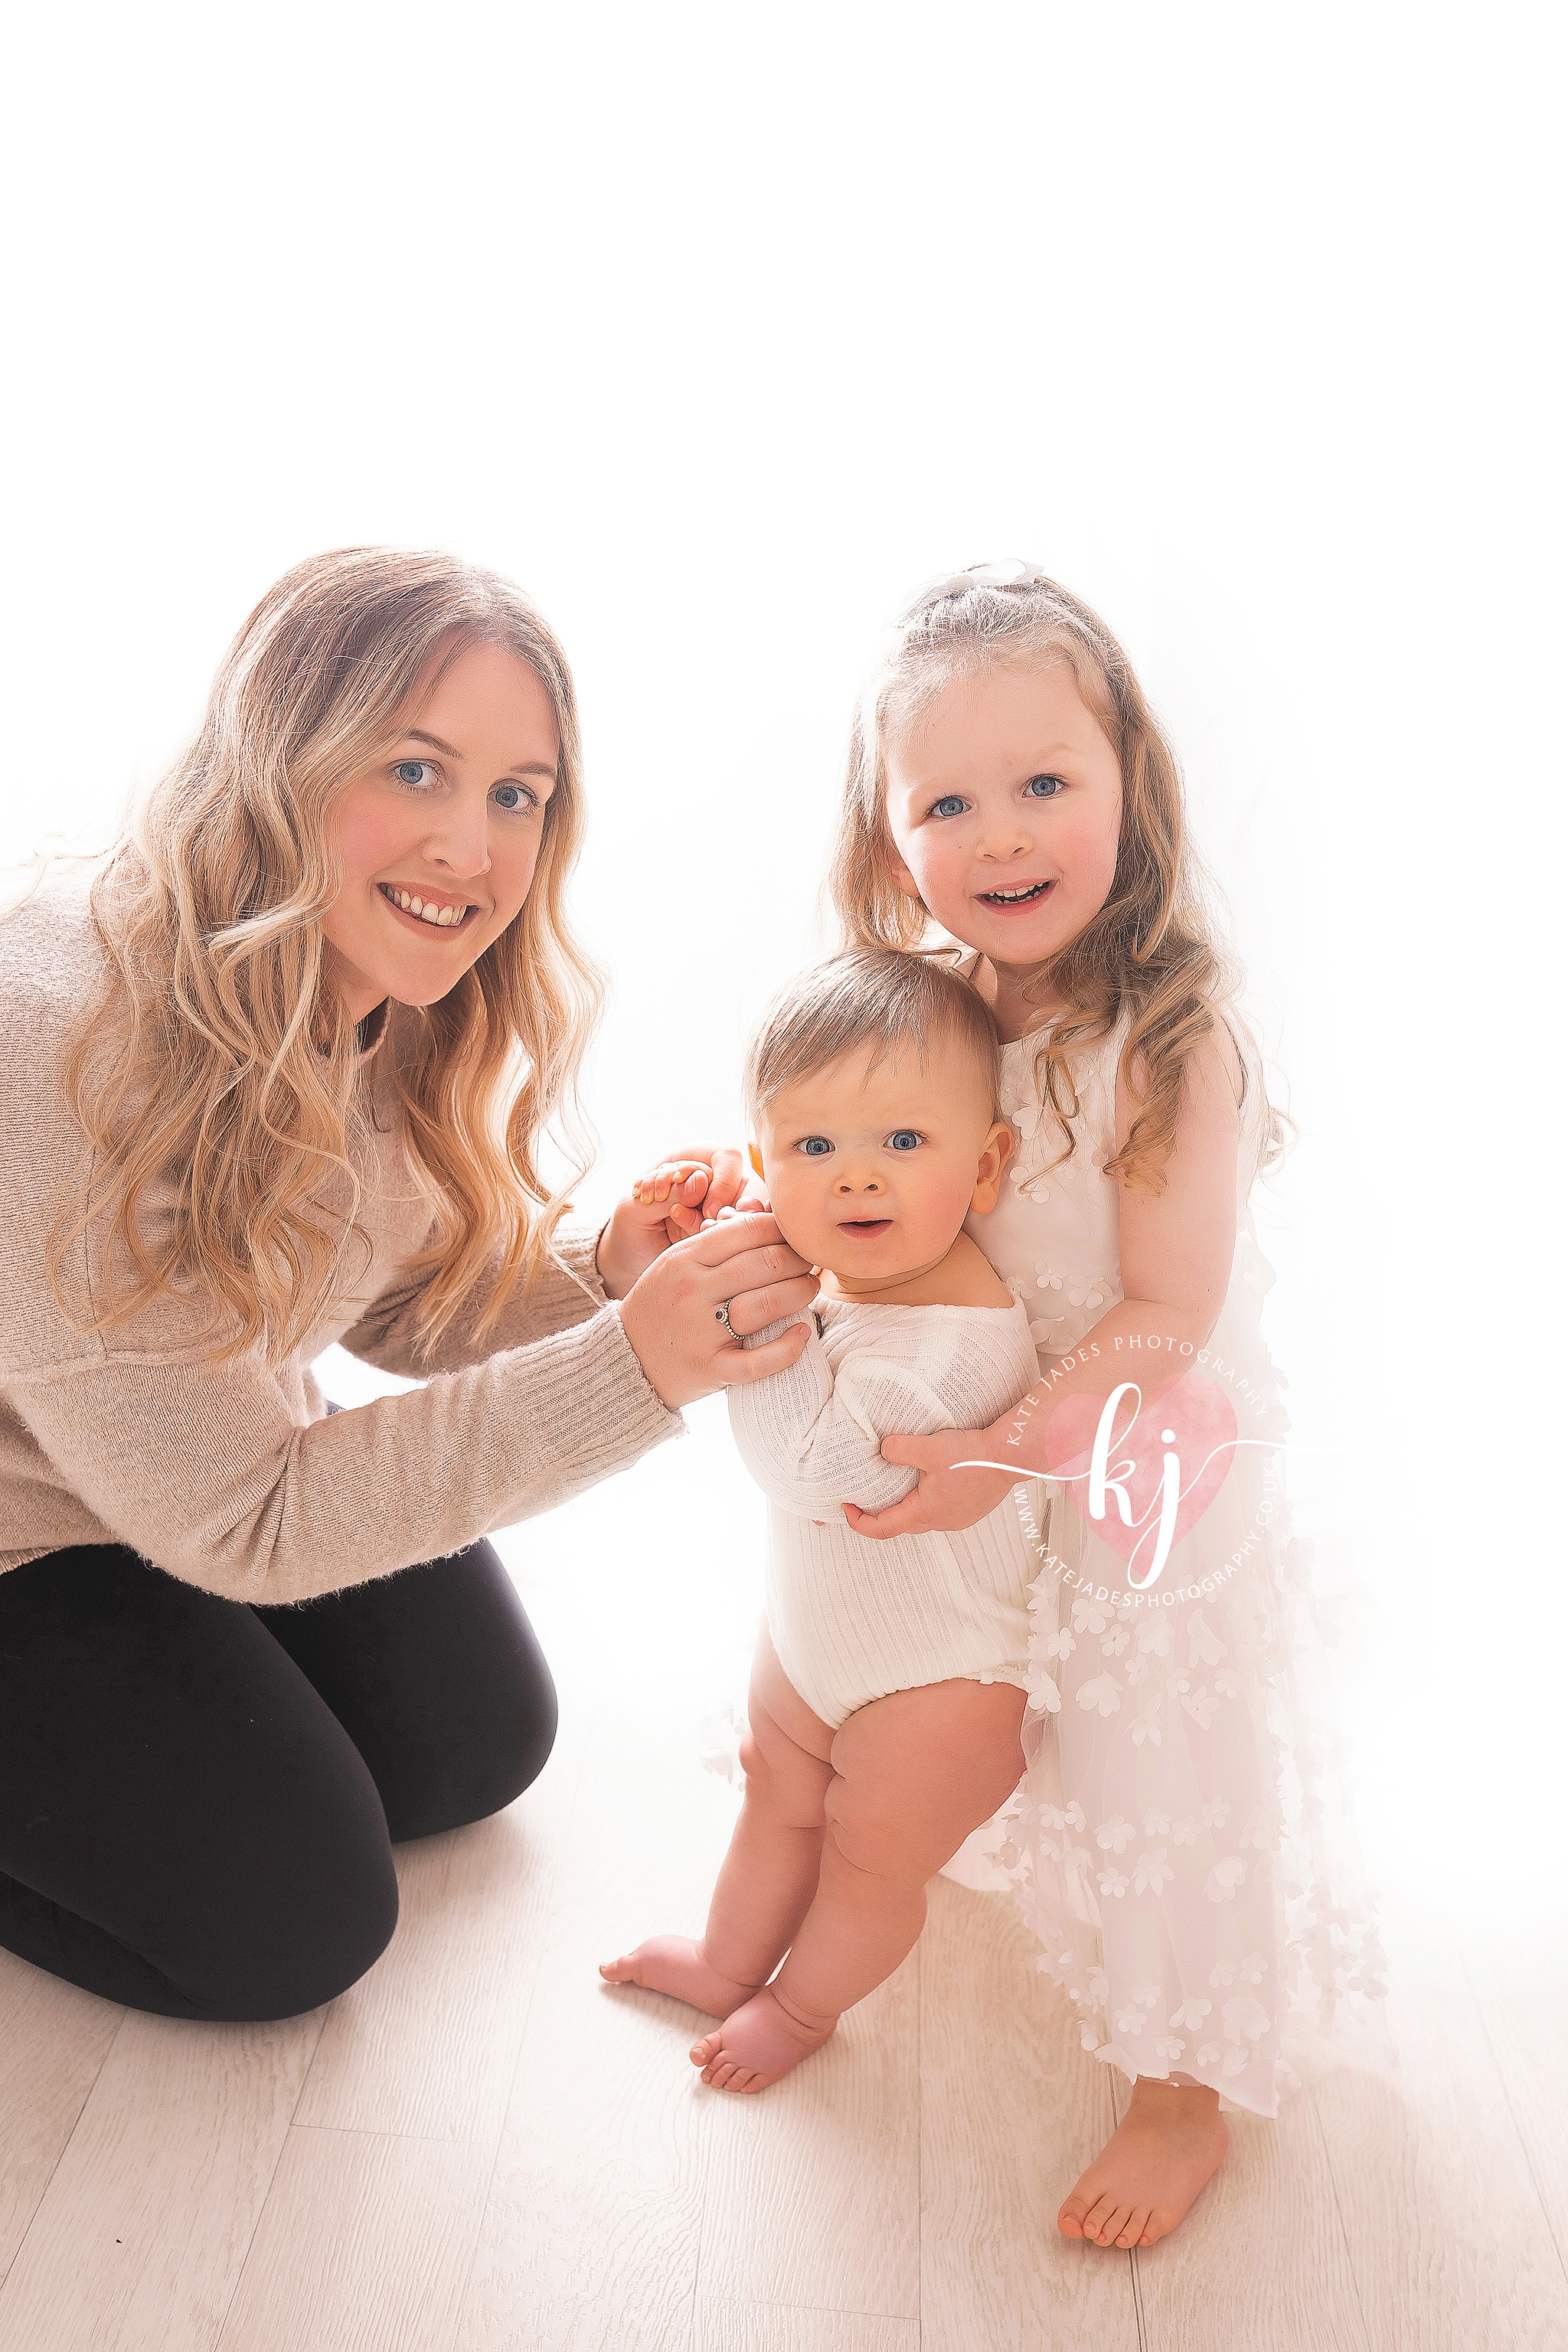 Mummy & Me Sessions Starting at £95